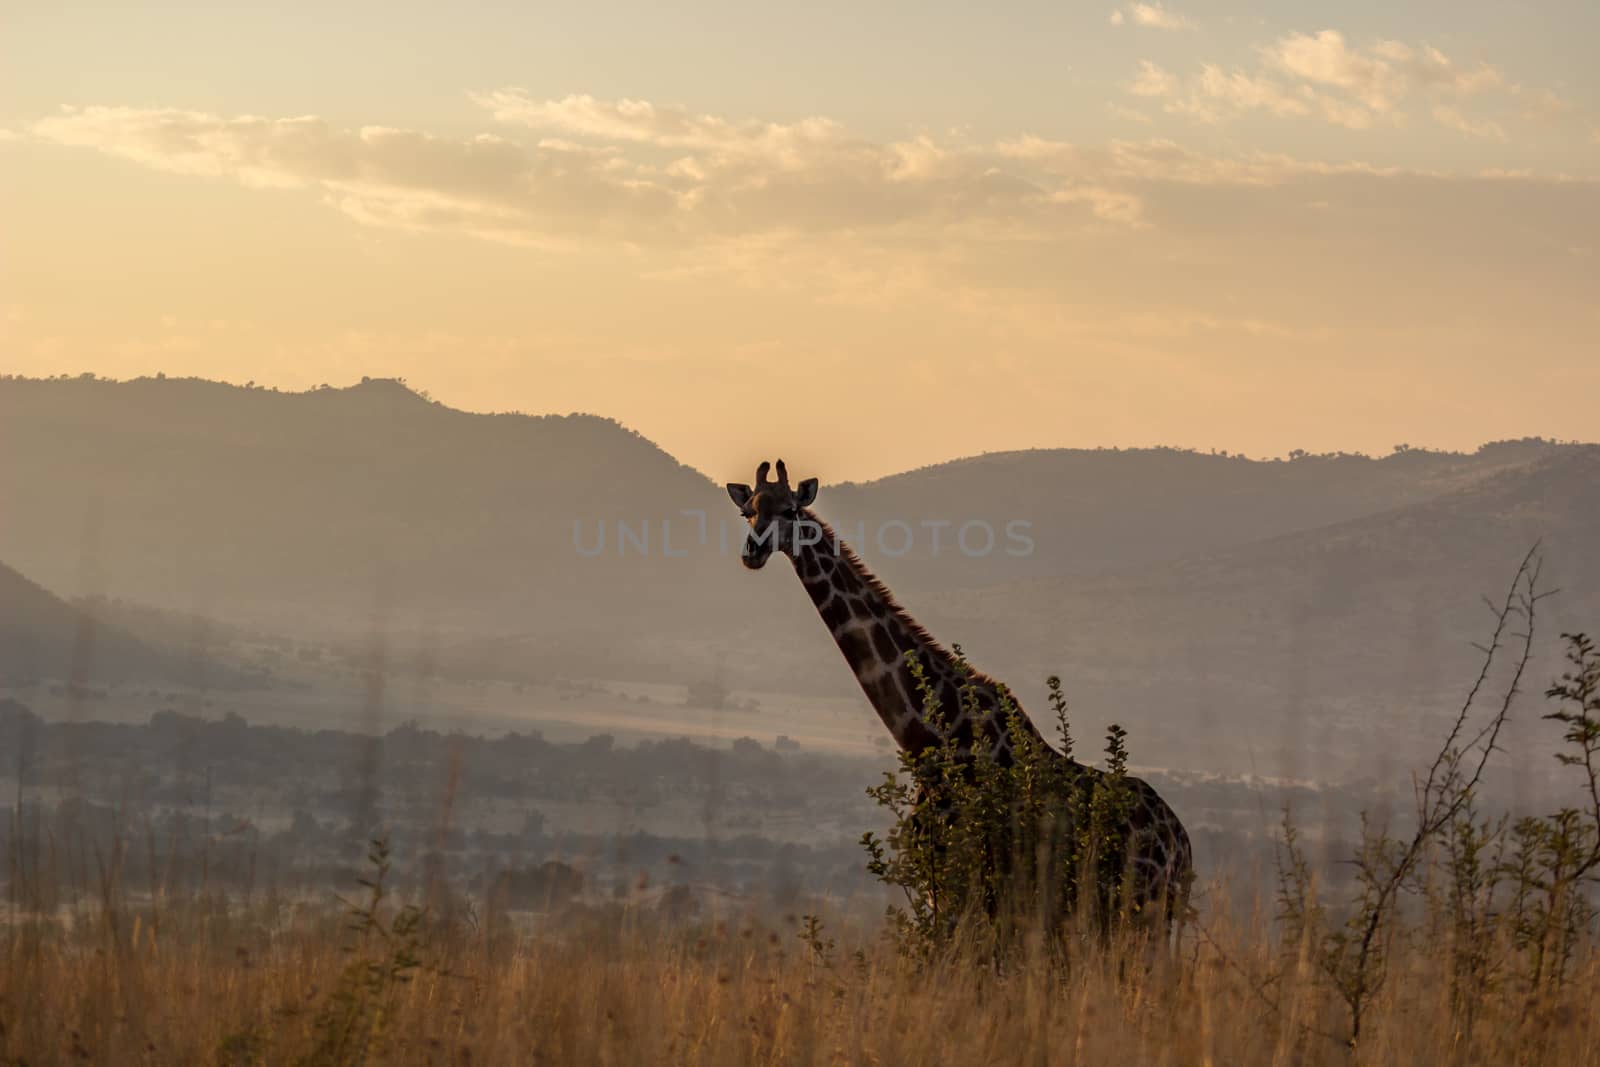 Giraffe in the morning just after sun rise